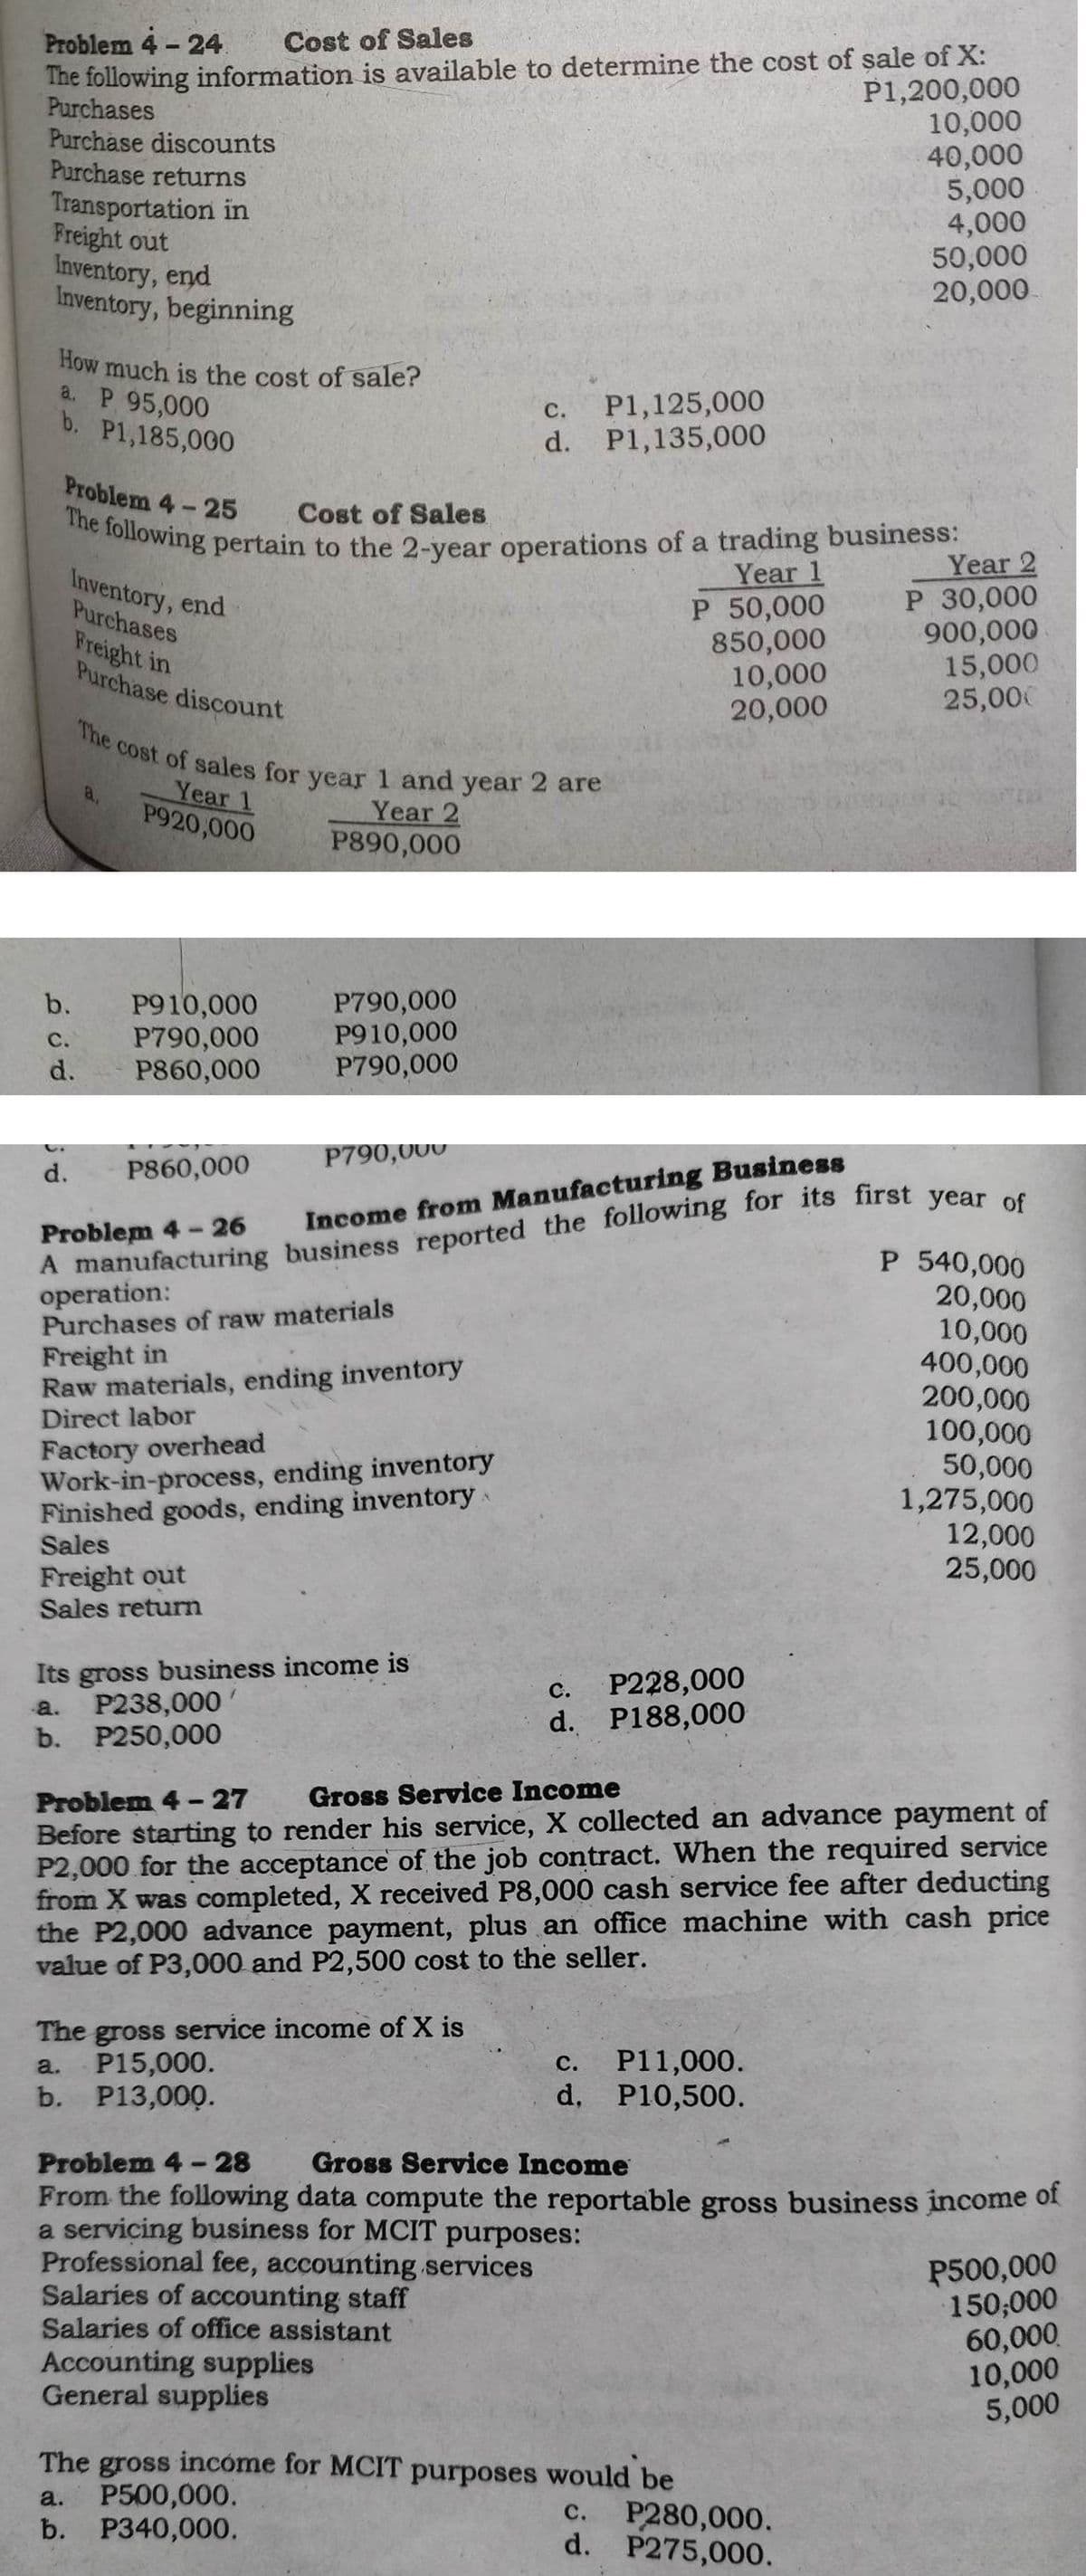 Problem 4-24
The following information
Purchases
Purchase discounts
Purchase returns
Transportation in
Freight out
Inventory, end
Inventory, beginning
How much is the cost of sale?
a. P 95,000
b. P1,185,000
b.
C.
Inventory, end
Purchases
d.
Problem 4-25
Cost of Sales
The following pertain to the 2-year operations of a trading business:
Year 1
P 50,000
850,000
Freight in
Purchase discount
d.
Cost of Sales
a.
P910,000
P790,000
P860,000
The cost of sales for year 1 and year 2 are
Year 2
Year 1
P920,000
P890,000
is available to determine the cost of sale of X:
P1,200,000
Freight out
Sales return
P790,000
P910,000
P790,000
operation:
Purchases of raw materials
P790,000
Freight in
Raw materials, ending inventory
Direct labor
Factory overhead
Work-in-process, ending inventory
Finished goods, ending inventory A
Sales
P860,000
Problem 4-26
Income from Manufacturing Business
A manufacturing business reported the following for its first year of
Its gross business income is
-a.
P238,000
b. P250,000
C.
d.
The gross service income of X is
a. P15,000.
b. P13,000.
Accounting supplies
General supplies
P1,125,000
P1,135,000
a. P500,000.
b. P340,000.
Salaries of accounting staff
Salaries of office assistant
10,000
20,000
C.
P228,000
d. P188,000
Problem 4-27
Gross Service Income
Before starting to render his service, X collected an advance payment of
P2,000 for the acceptance of the job contract. When the required service
from X was completed, X received P8,000 cash service fee after deducting
the P2,000 advance payment, plus an office machine with cash price
value of P3,000 and P2,500 cost to the seller.
10,000
40,000
5,000
4,000
50,000
20,000
C.
P11,000.
d, P10,500.
The gross income for MCIT purposes would be
Year 2
P 30,000
900,000
15,000
25,000
Problem 4-28
Gross Service Income
From the following data compute the reportable gross business income of
a servicing business for MCIT purposes:
Professional fee, accounting services
c. P280,000.
d.
P275,000.
P 540,000
20,000
10,000
400,000
200,000
100,000
50,000
1,275,000
12,000
25,000
P500,000
150,000
60,000
10,000
5,000